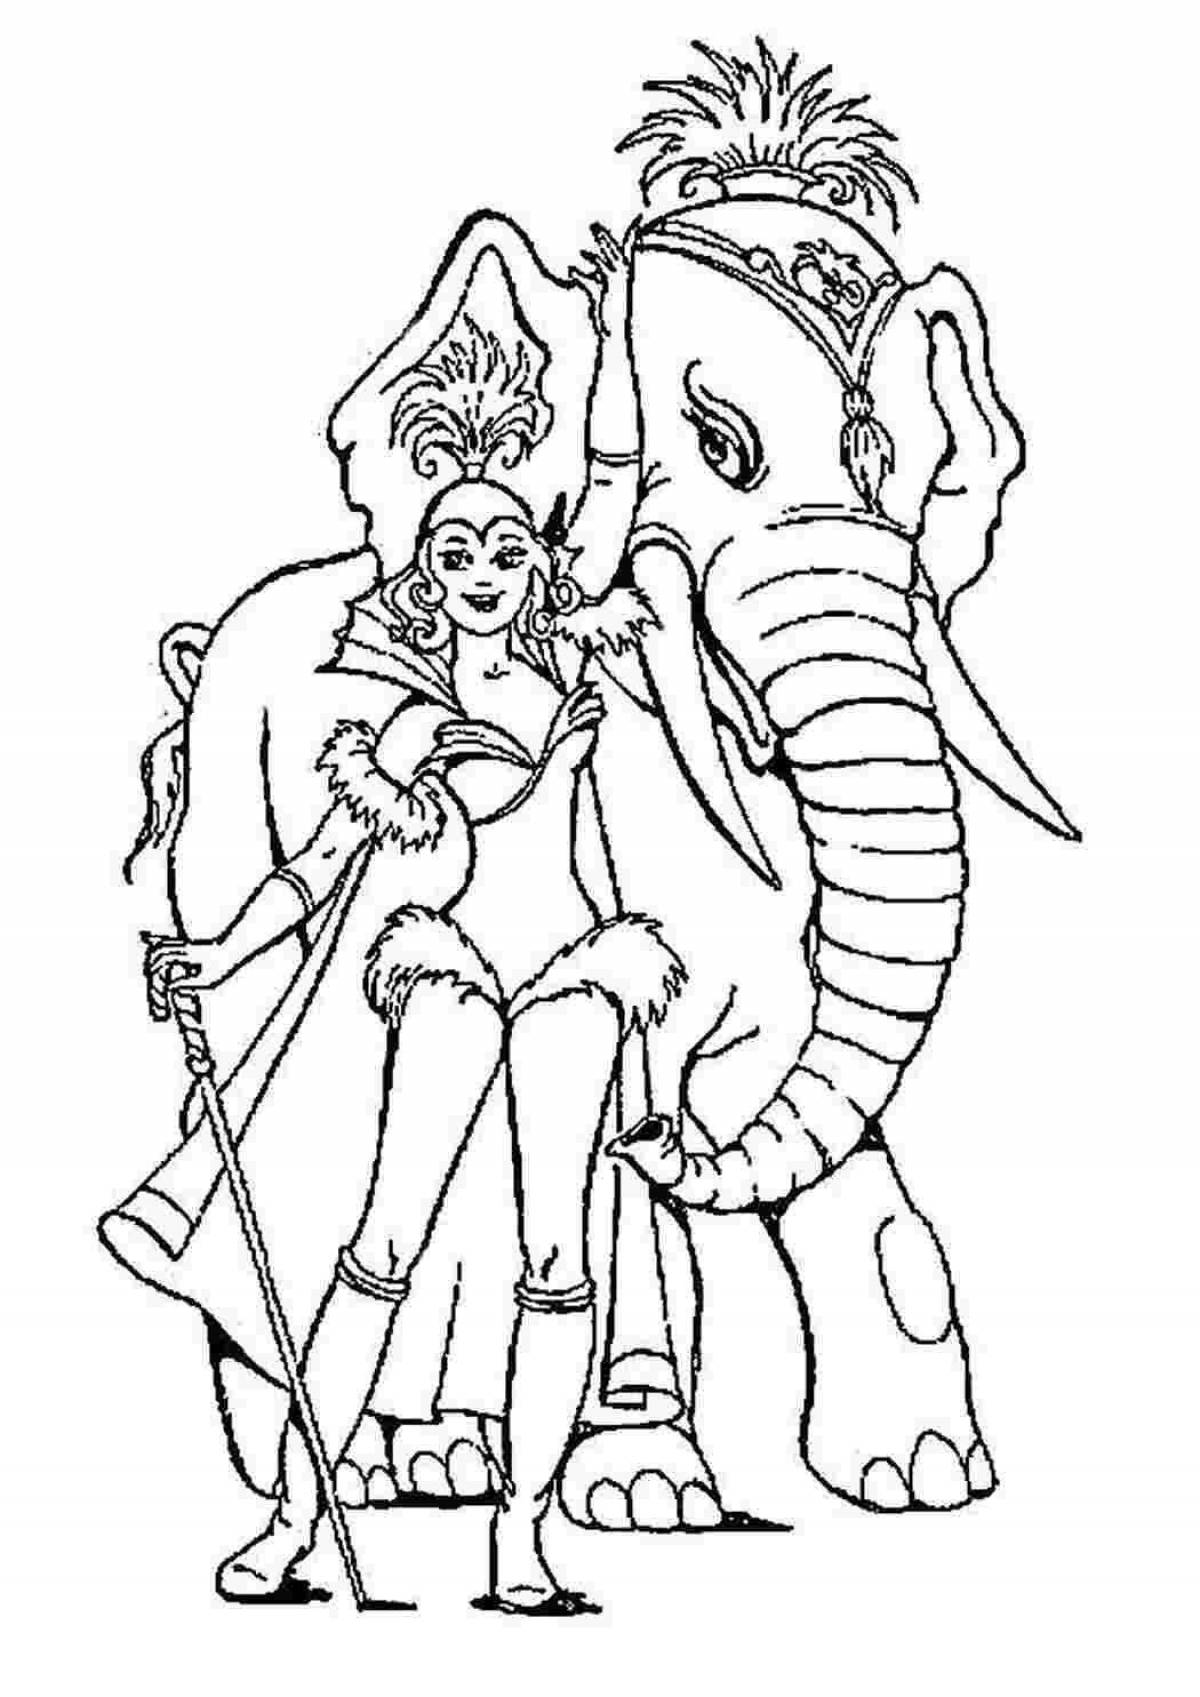 Coloring fairytale circus elephant